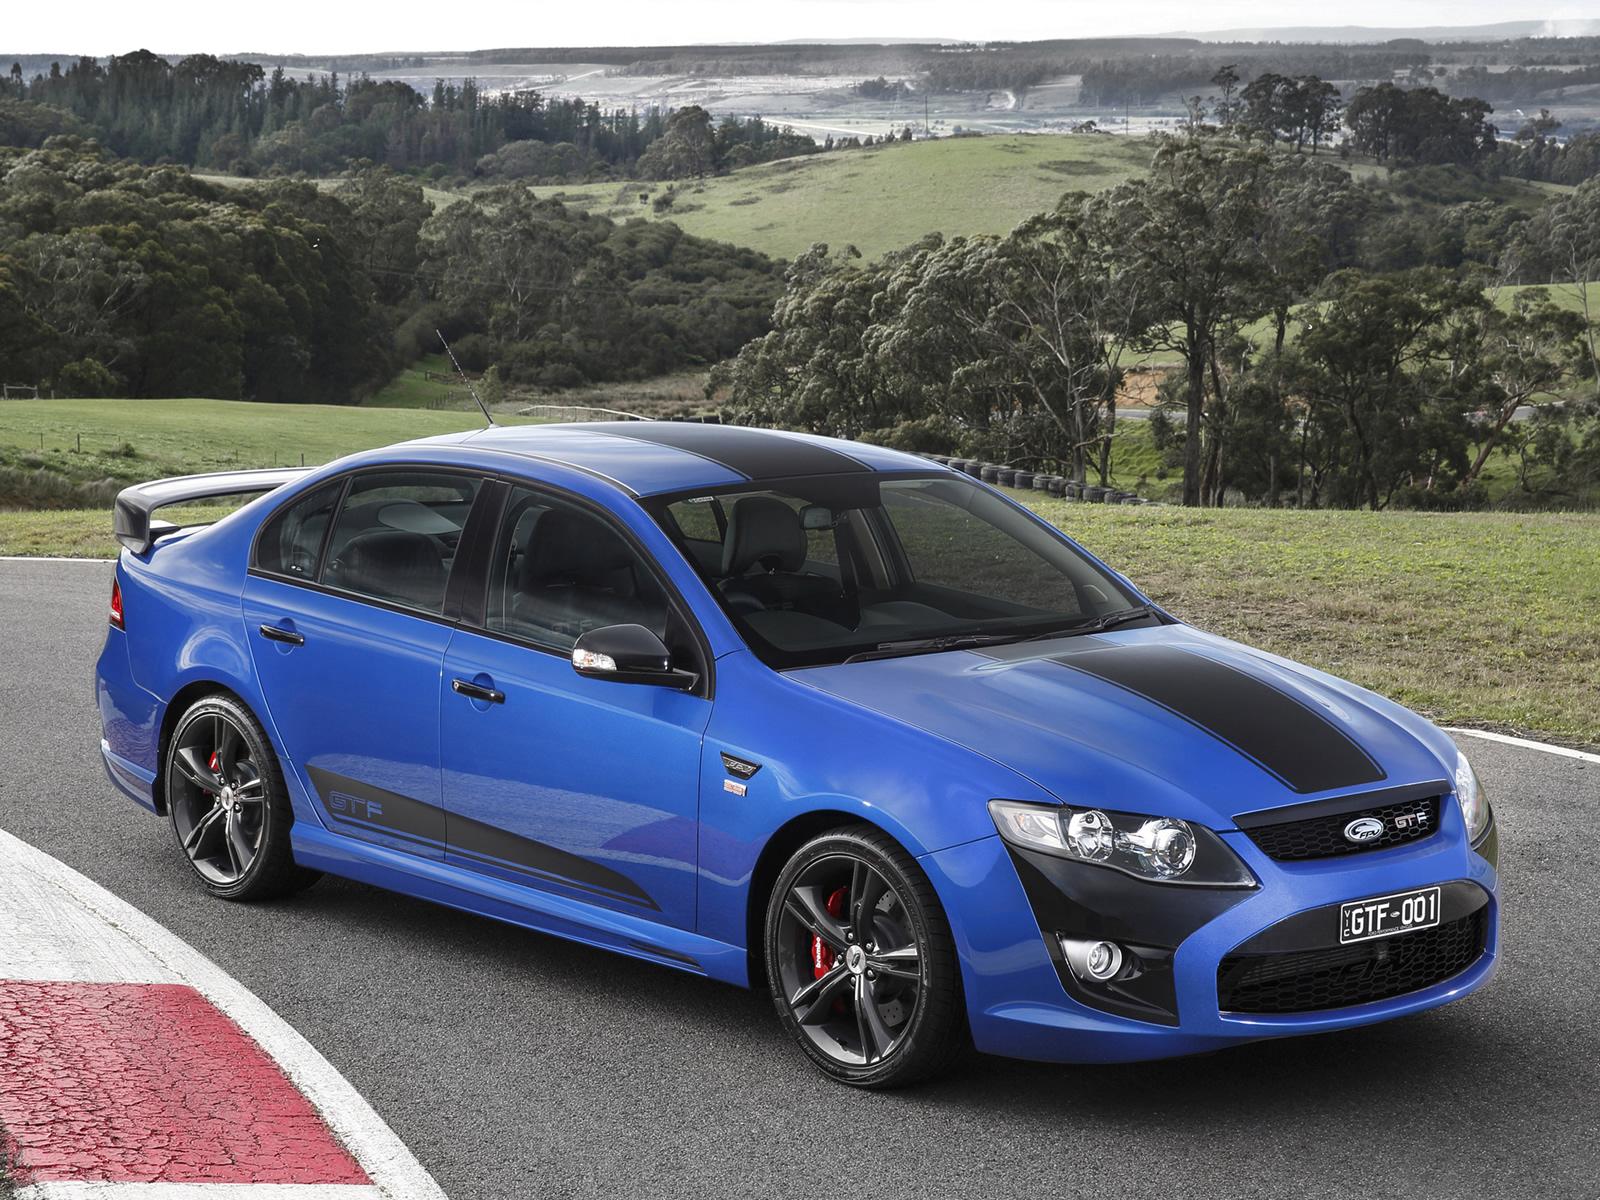 Ford Cars - News: FPV GT F 351 officially unveiled1600 x 1200